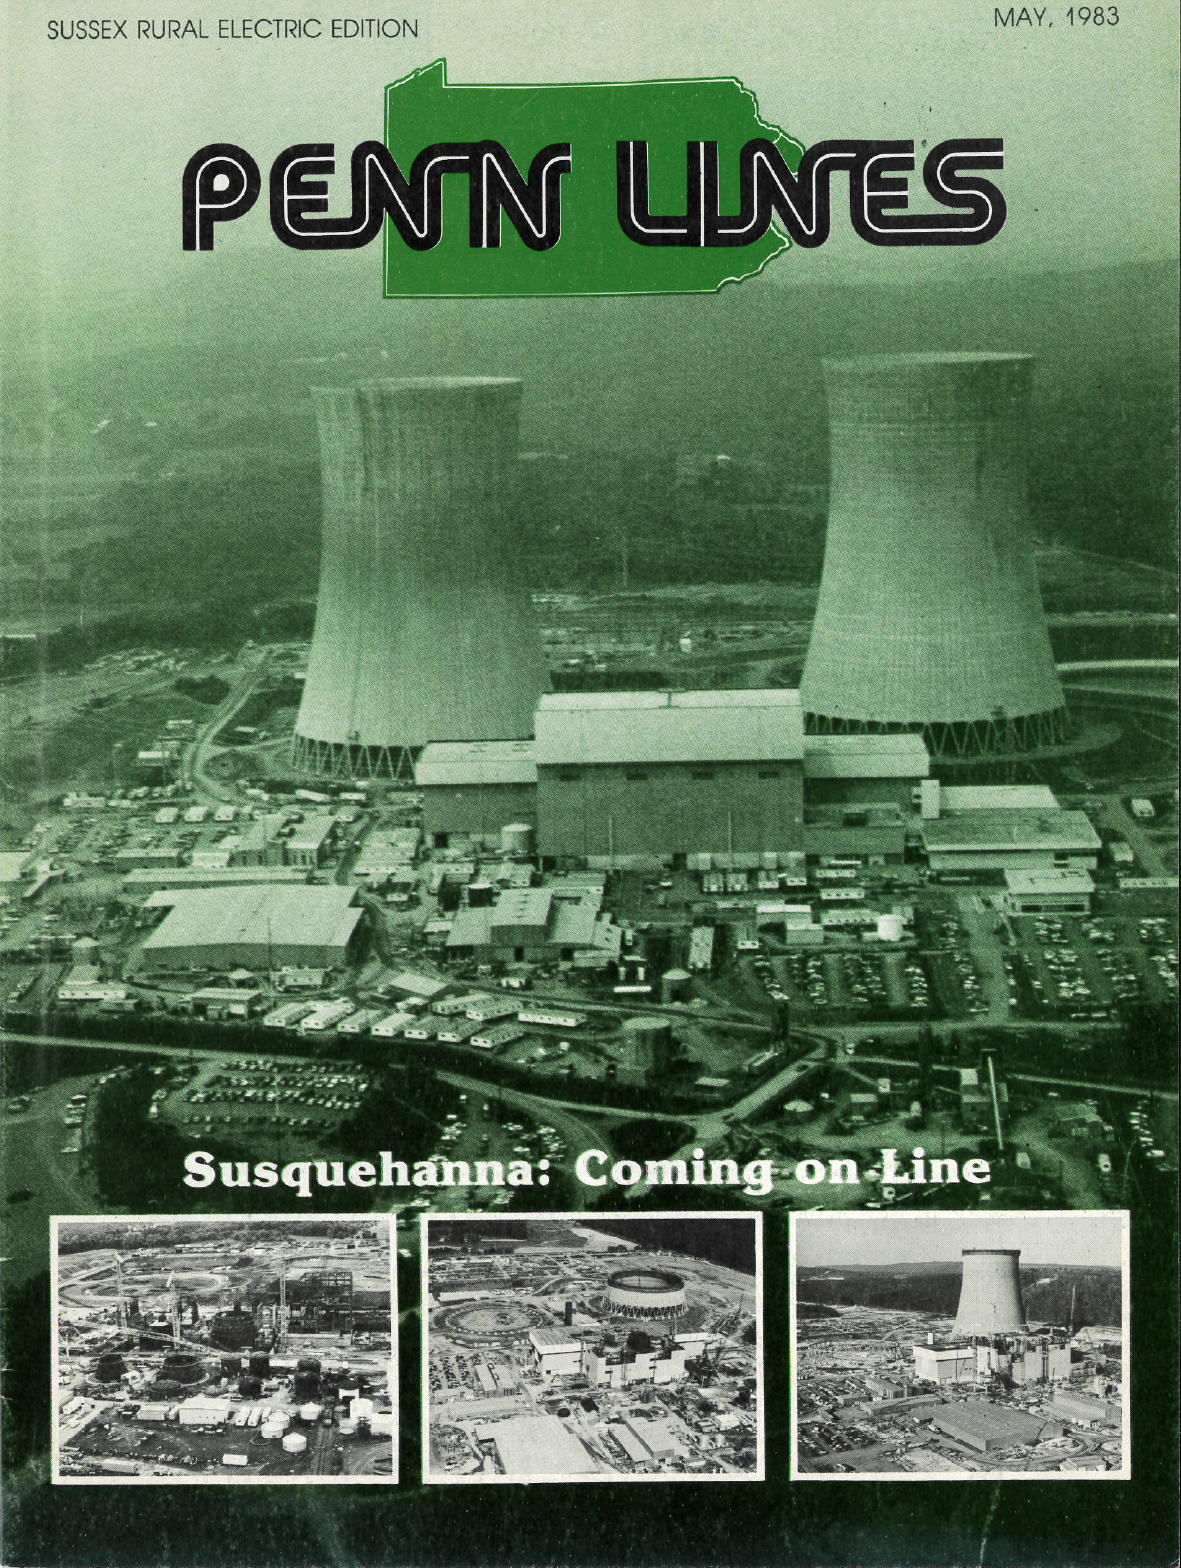 Pictured: The cover of the May, 1983 issue of “Penn Lines” – the magazine produced by the Pennsylvania Rural Electric Administration. This issue focuses on the introduction of the Susquehanna Steam Electric Plant, which acts as Sussex Rural Electric Cooperative’s primary power source to this day.